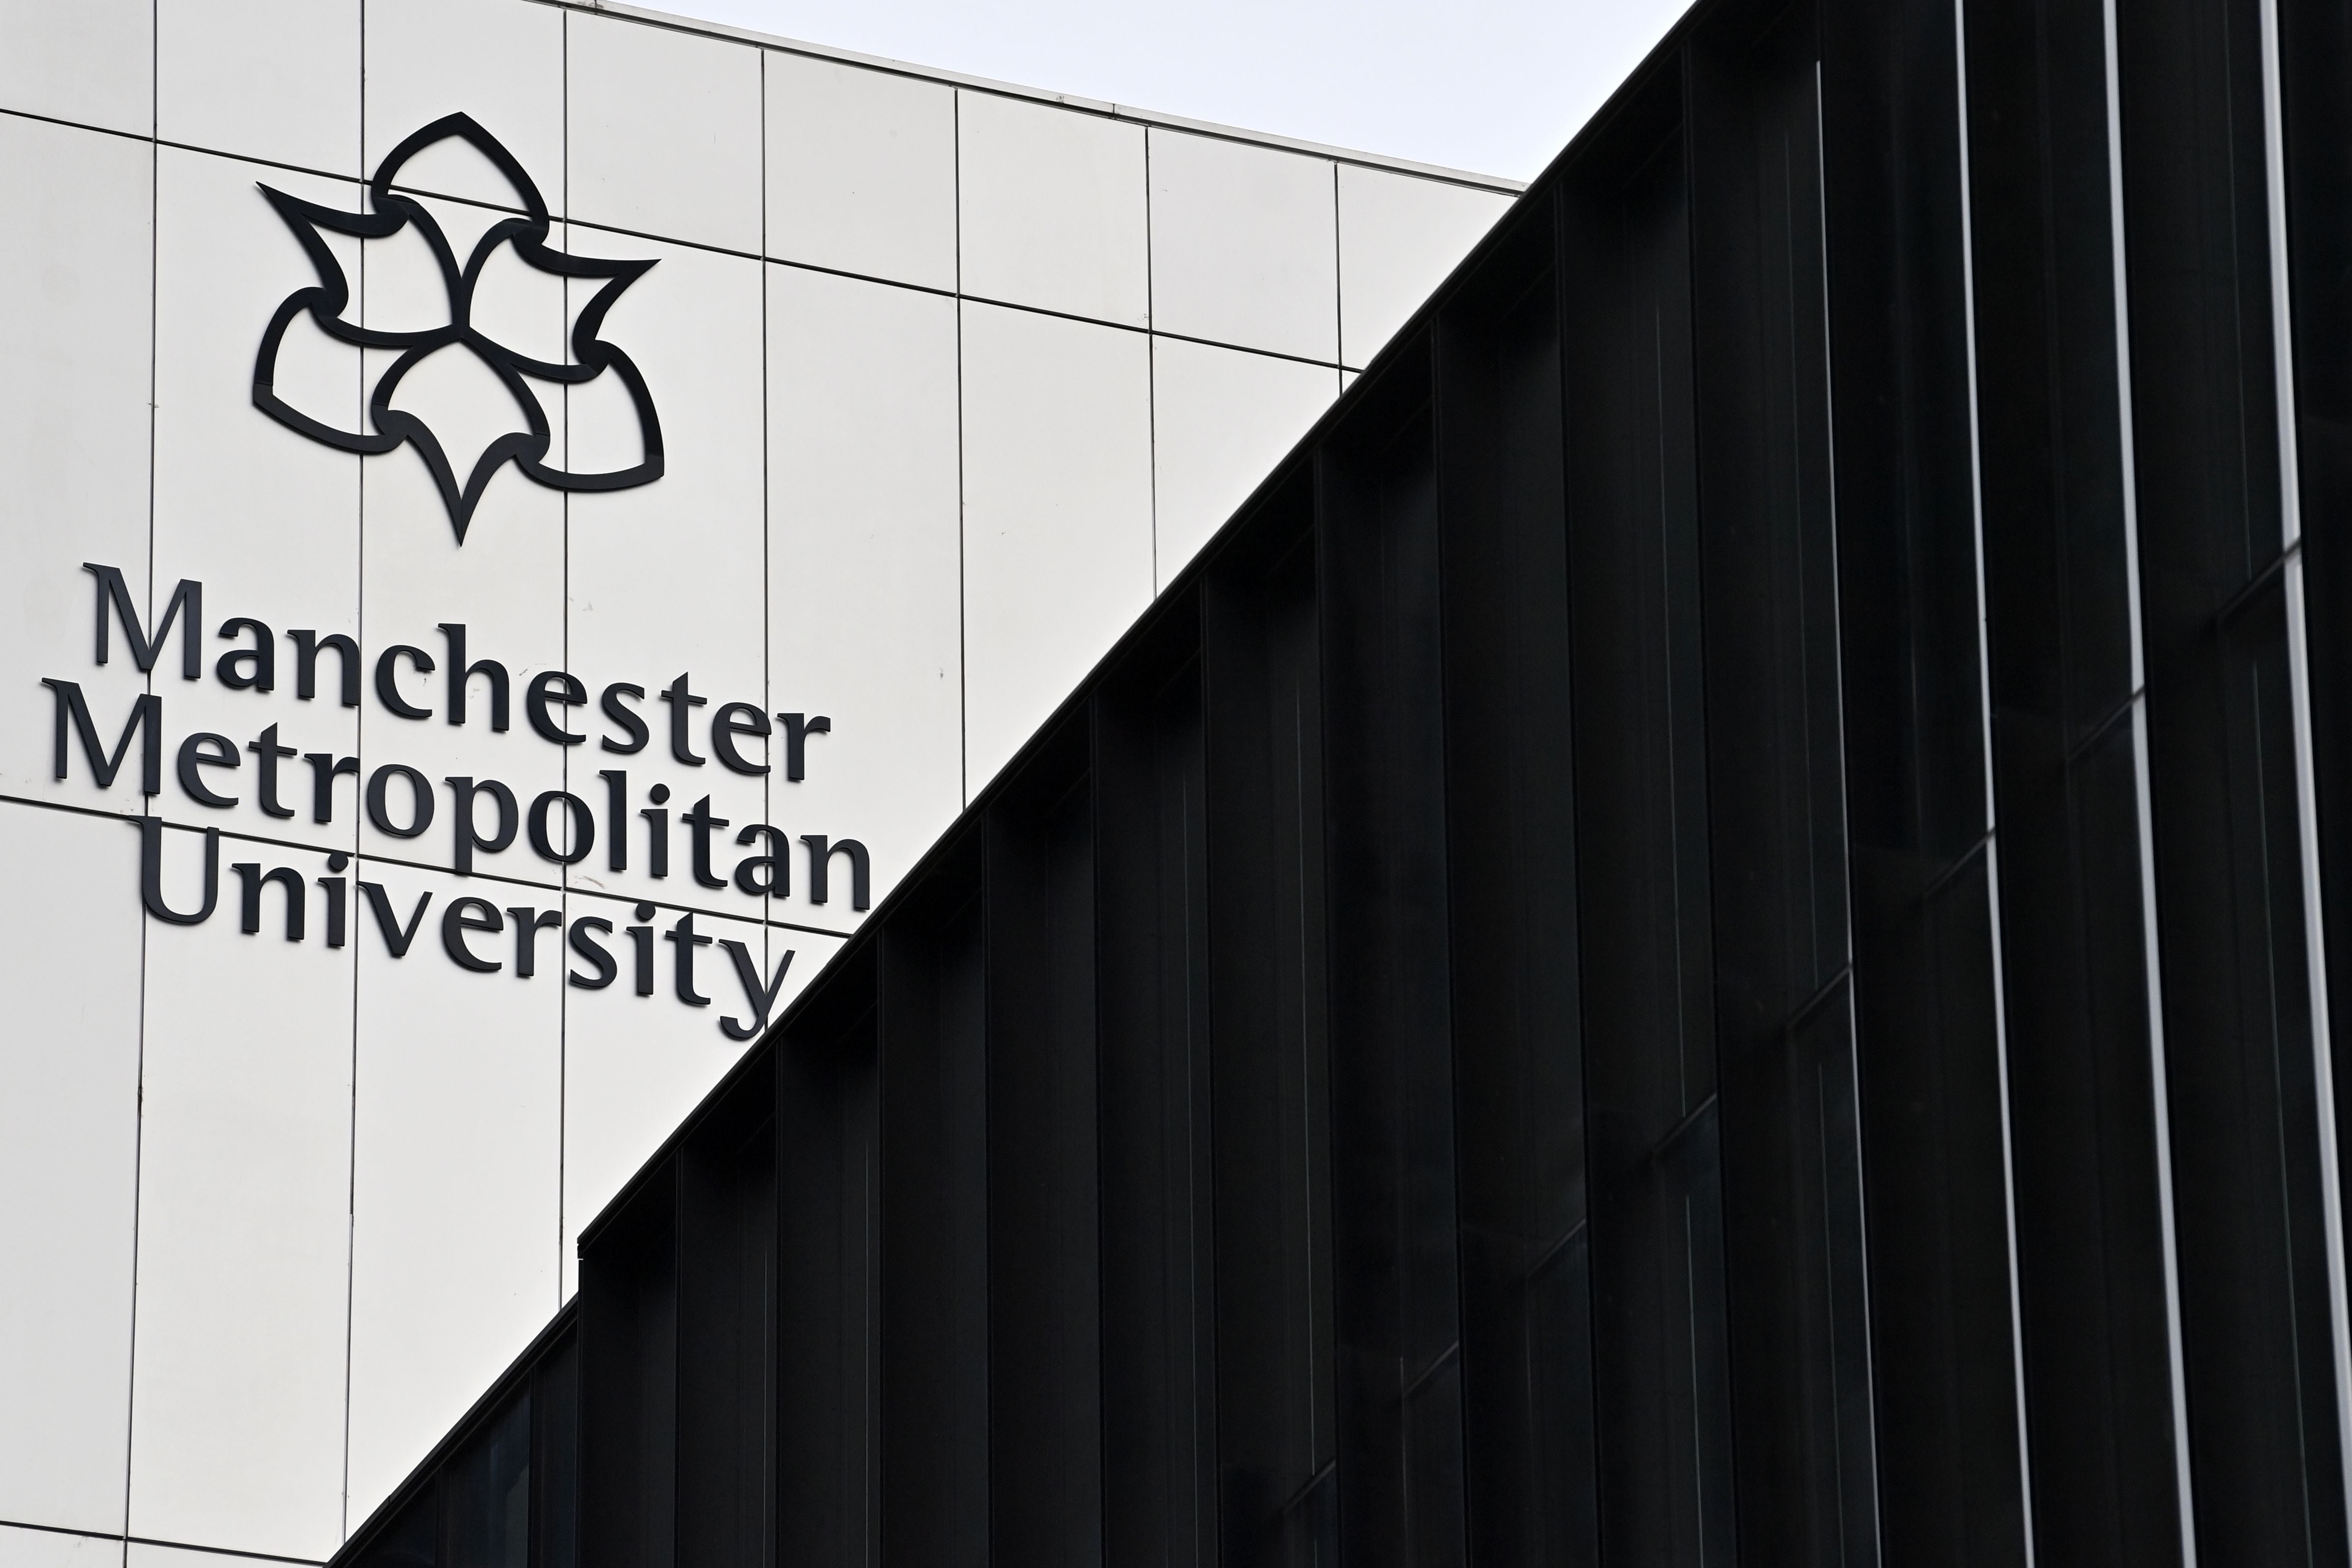 Manchester Metropolitan University announced a greater shift towards online teaching in October